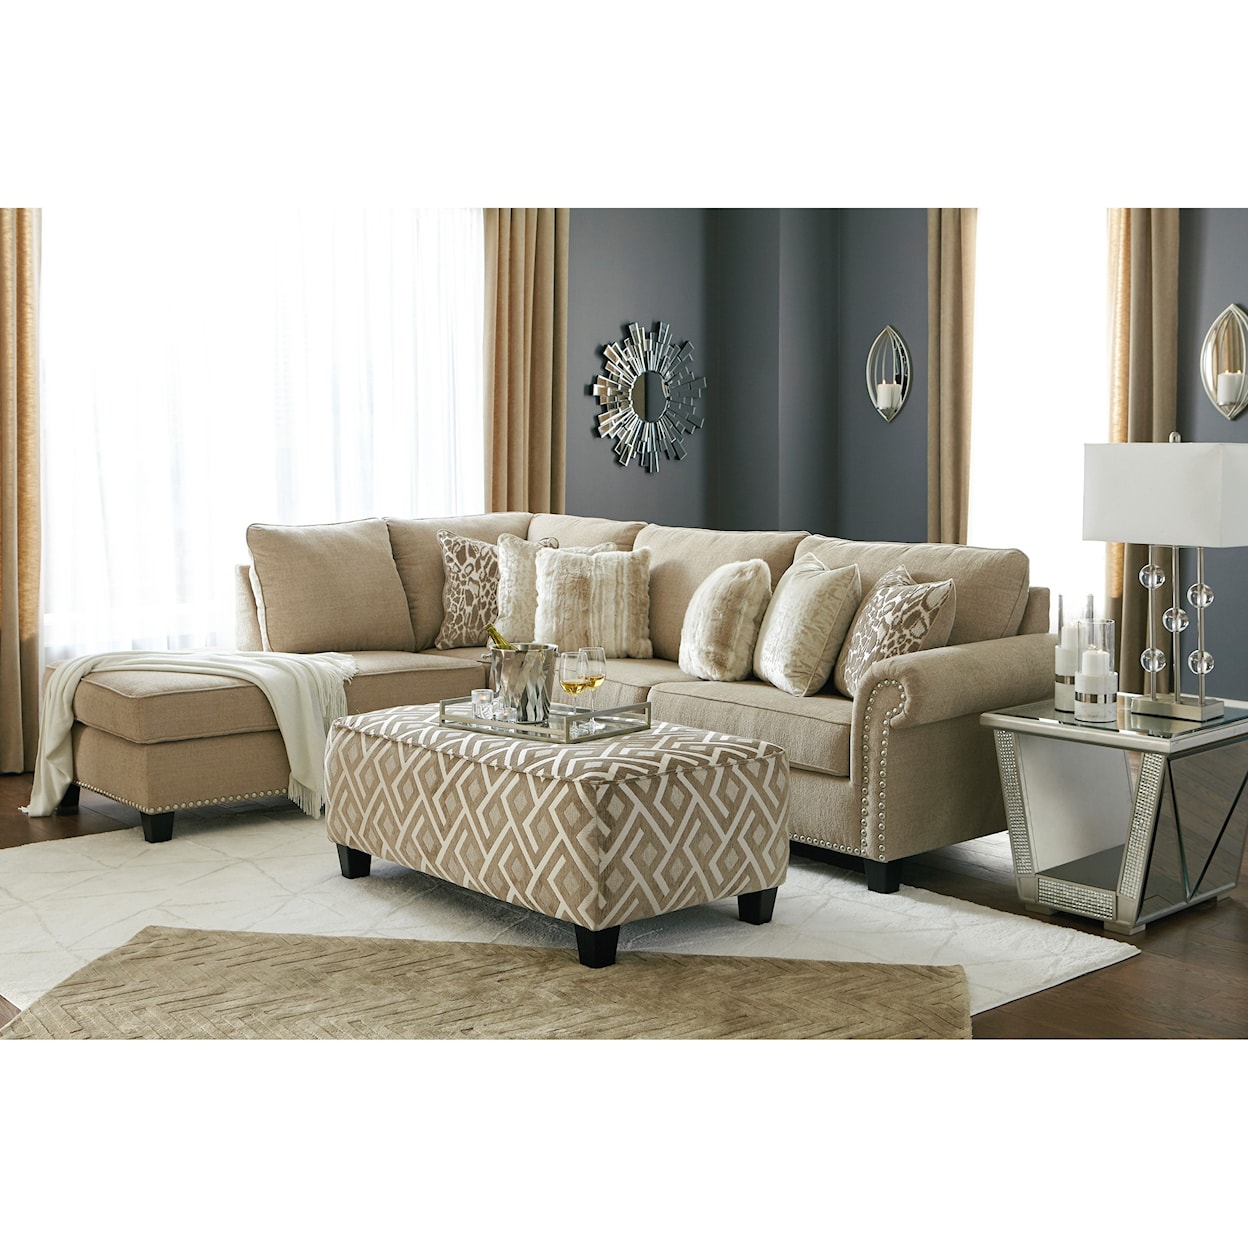 Signature Design by Ashley Dovemont 2pc Sectional and ottoman